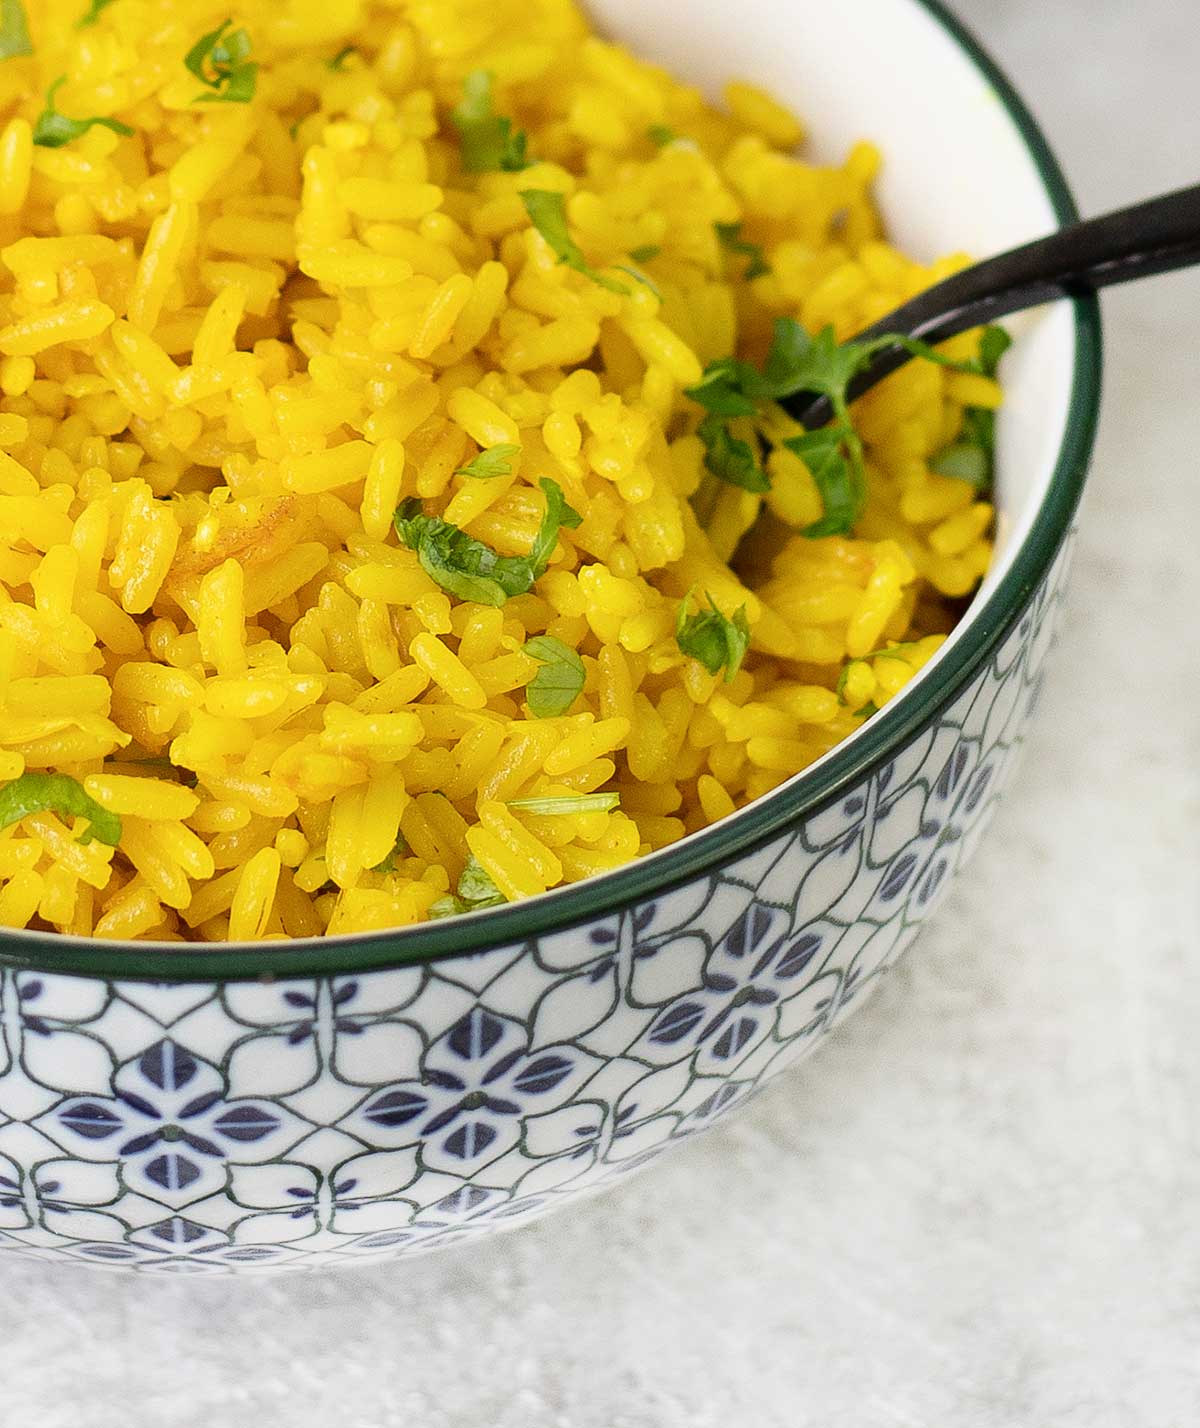 A spoonful of Turmeric rice.